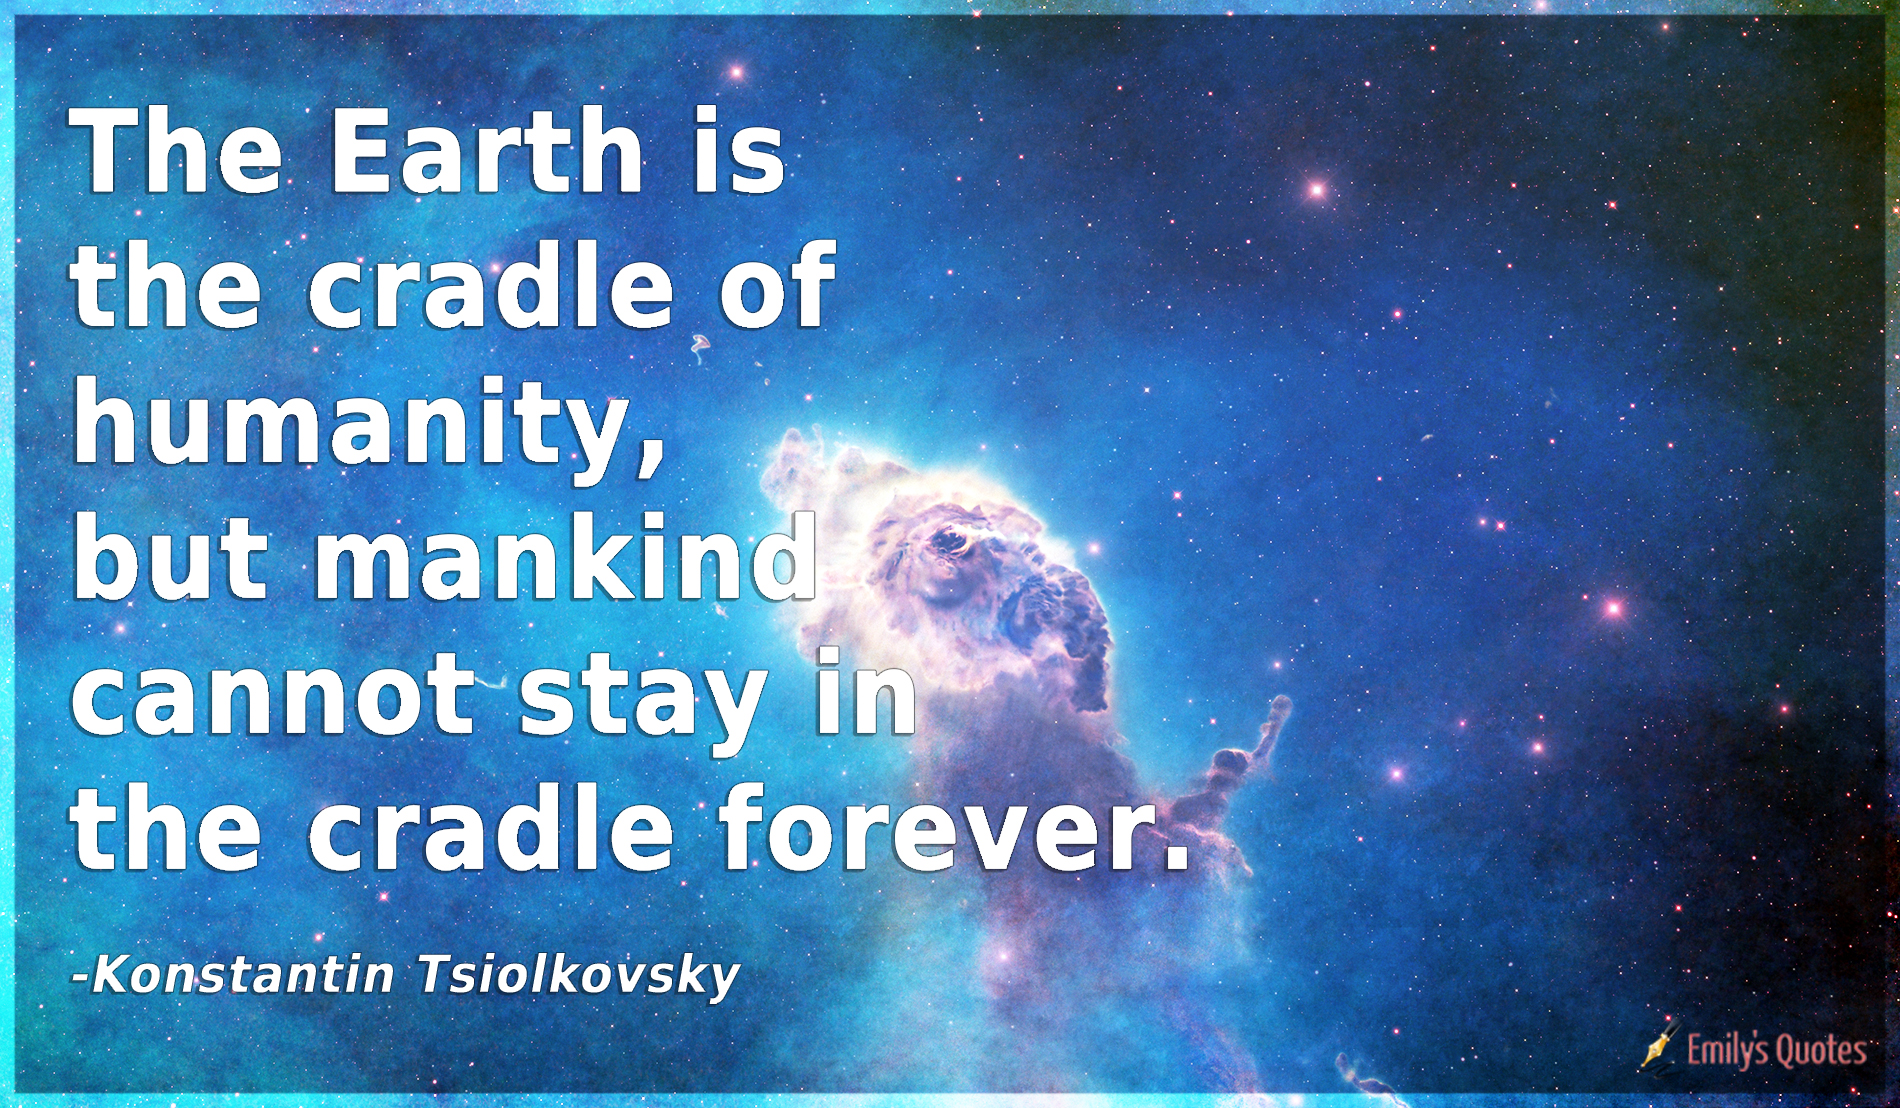 The Earth is the cradle of humanity, but mankind cannot stay in the cradle forever